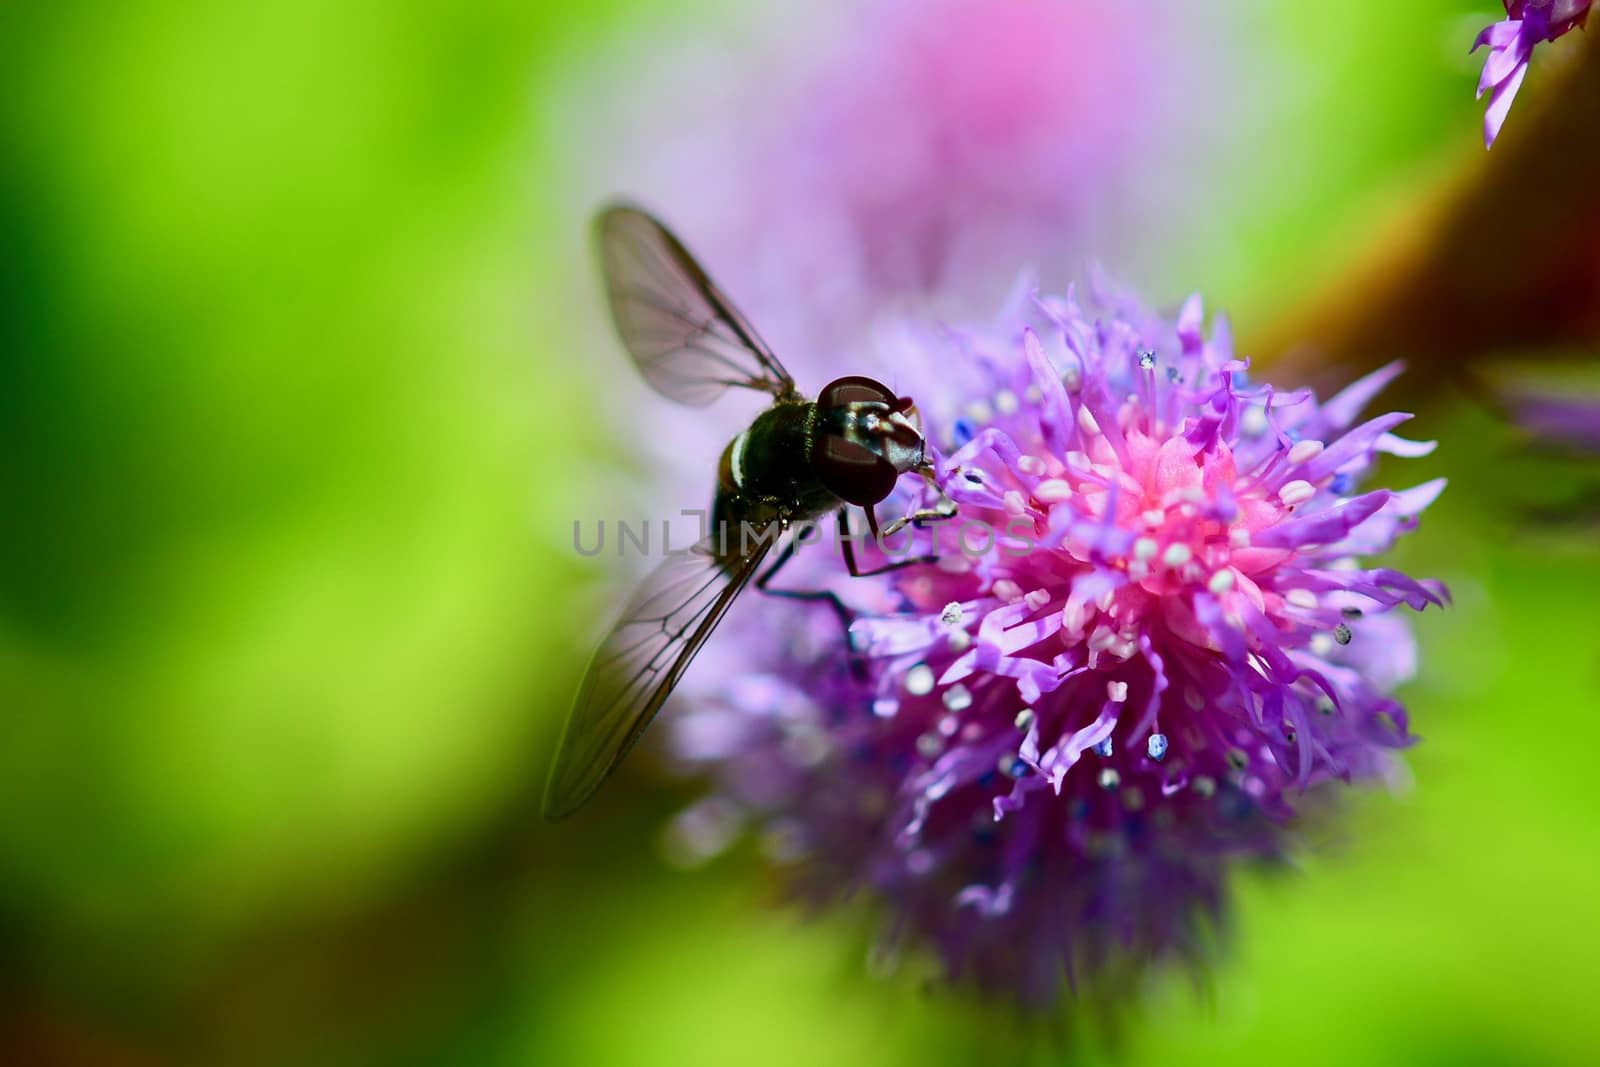 Hoverfly - a fly which frequently hovers motionless in the air and feeds on the nectar of flowers.